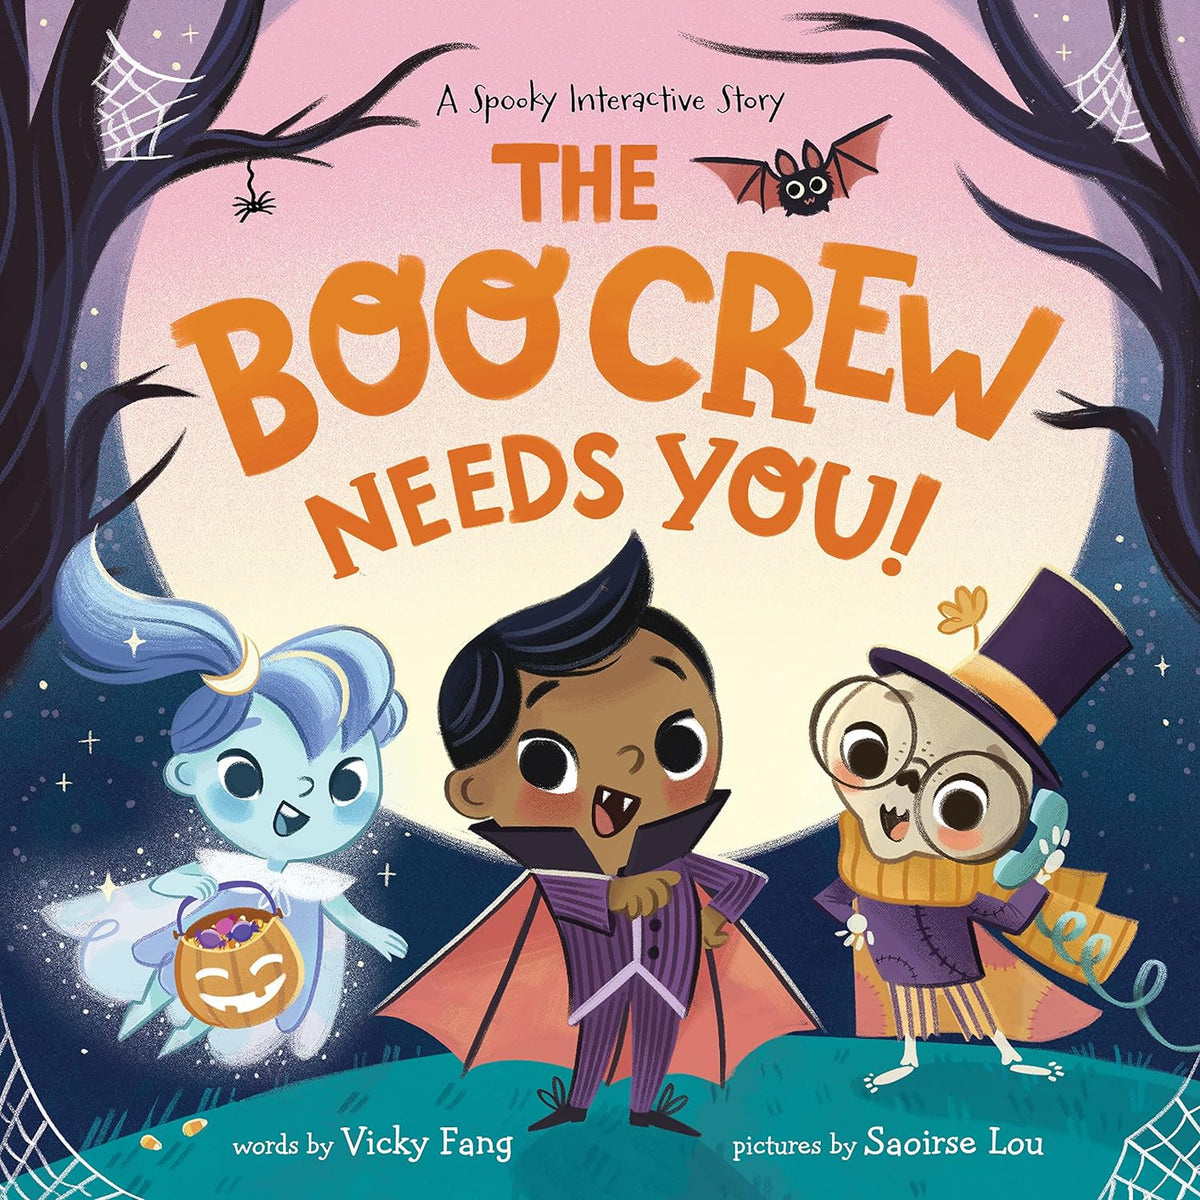 BooCrew Needs You: A Spooky Interactive Story